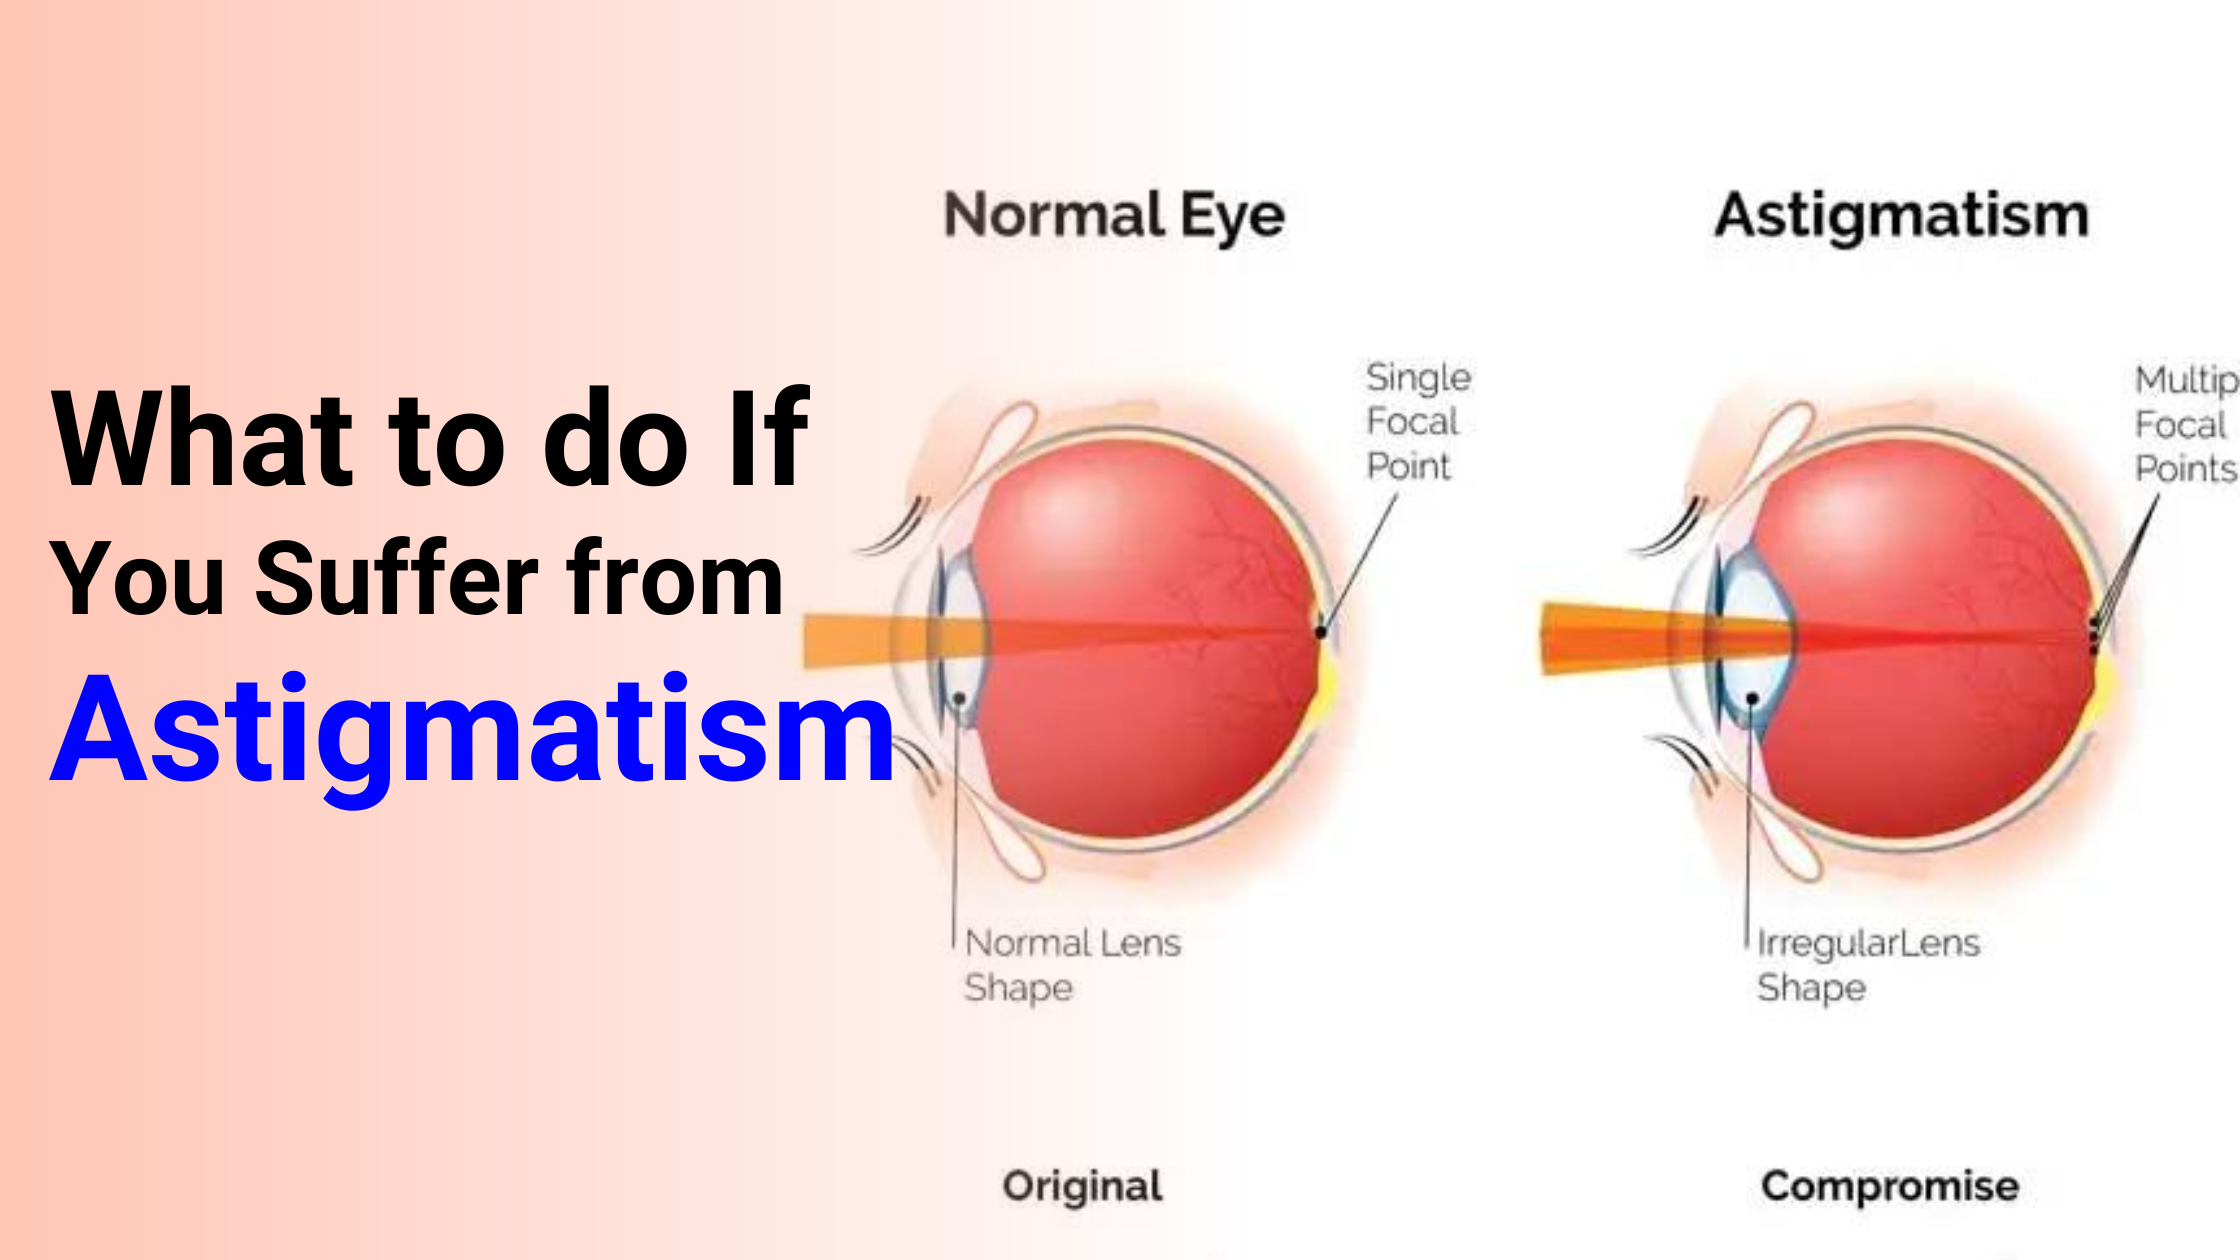 What to do If You Suffer from Astigmatism